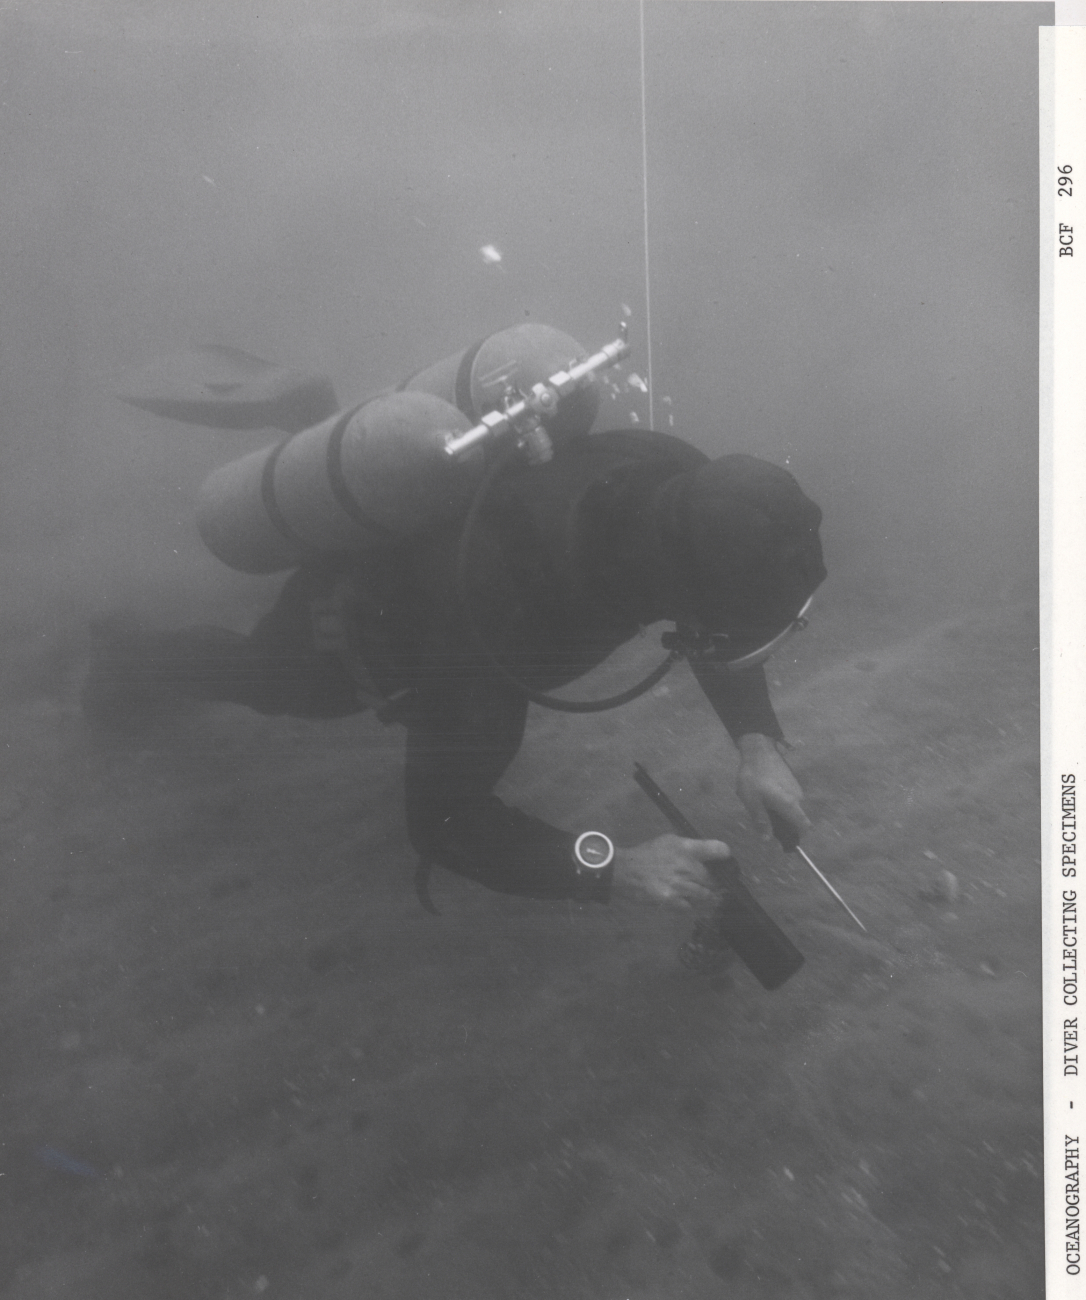 Diver collecting specimens and observing bottom organisms